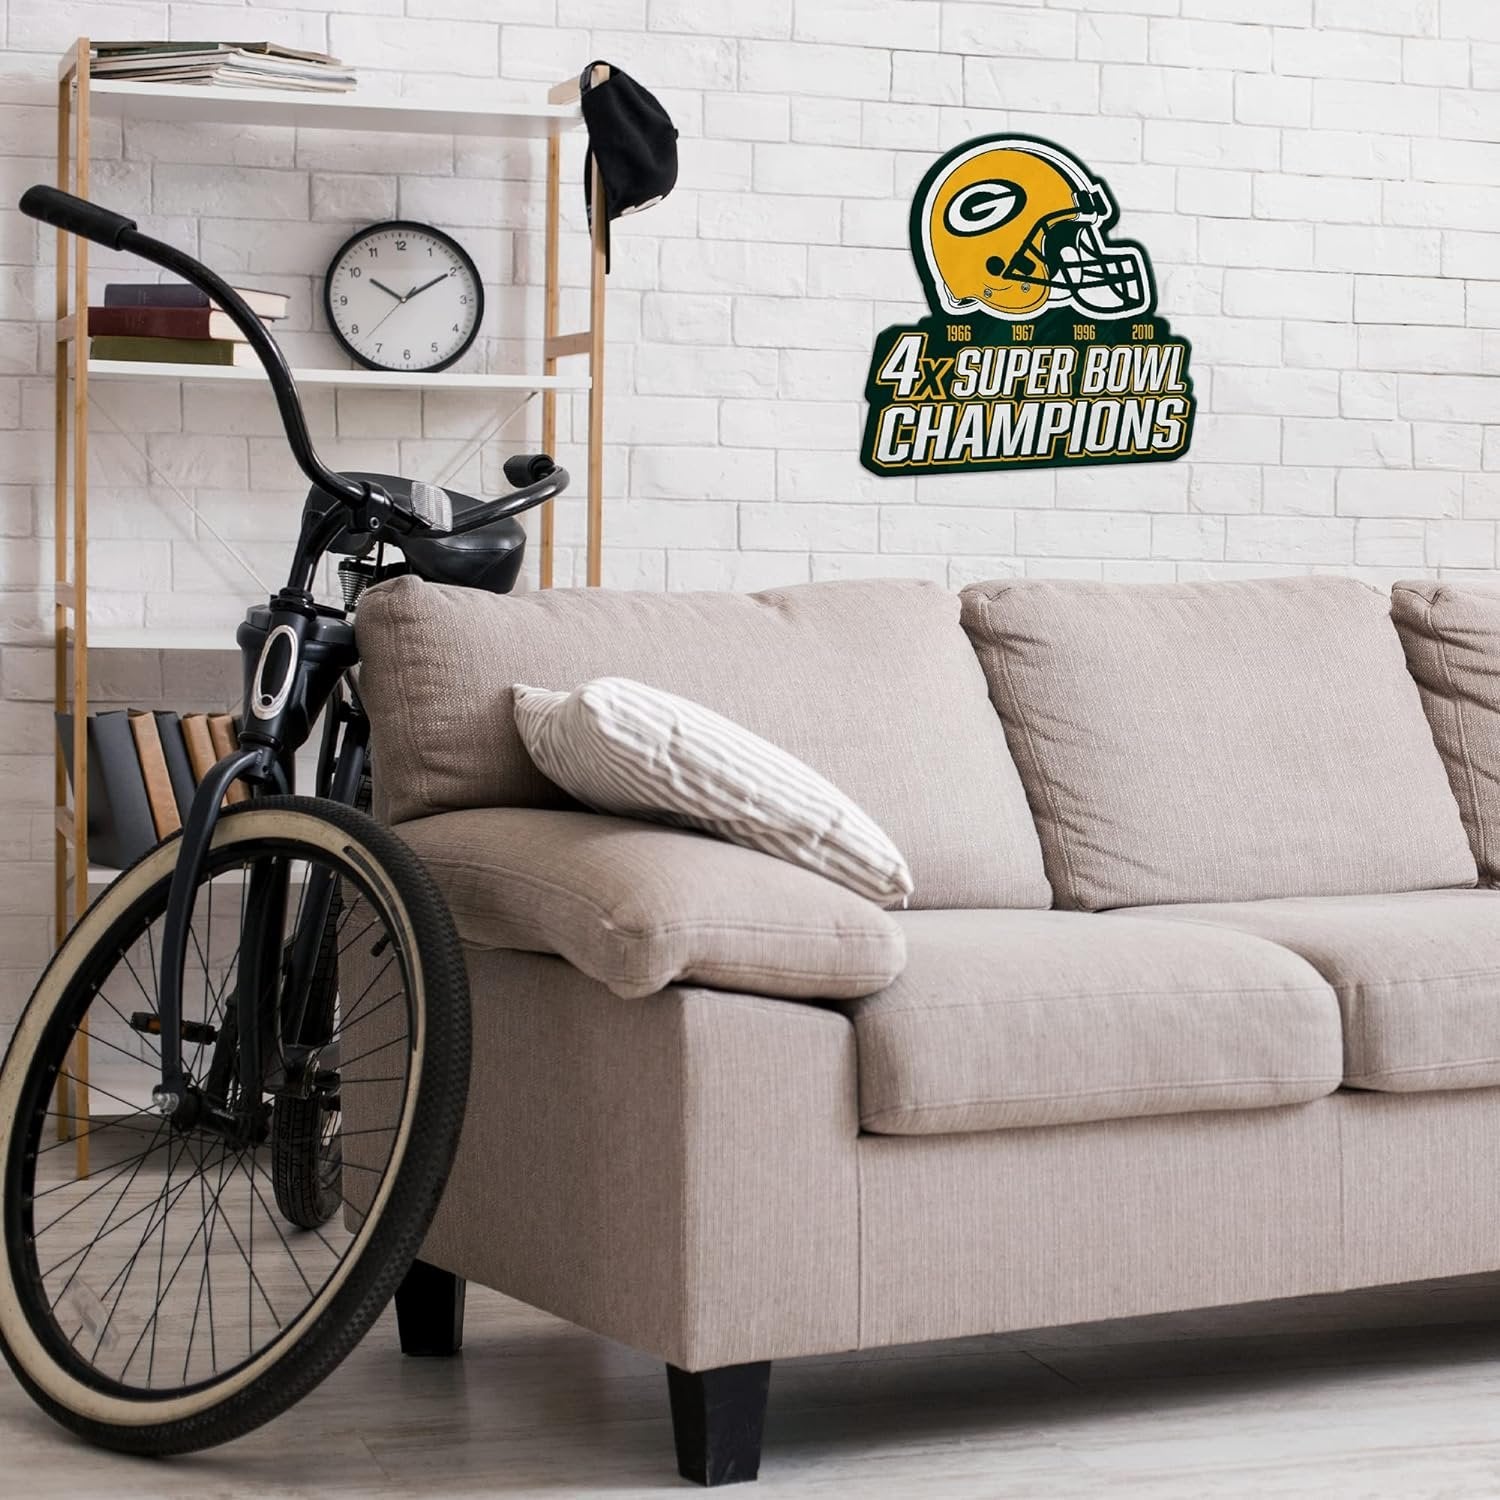 Green Bay Packers 4-Time Super Bowl Champions Soft Felt Wall Pennant, 18 Inch, Easy to Hang